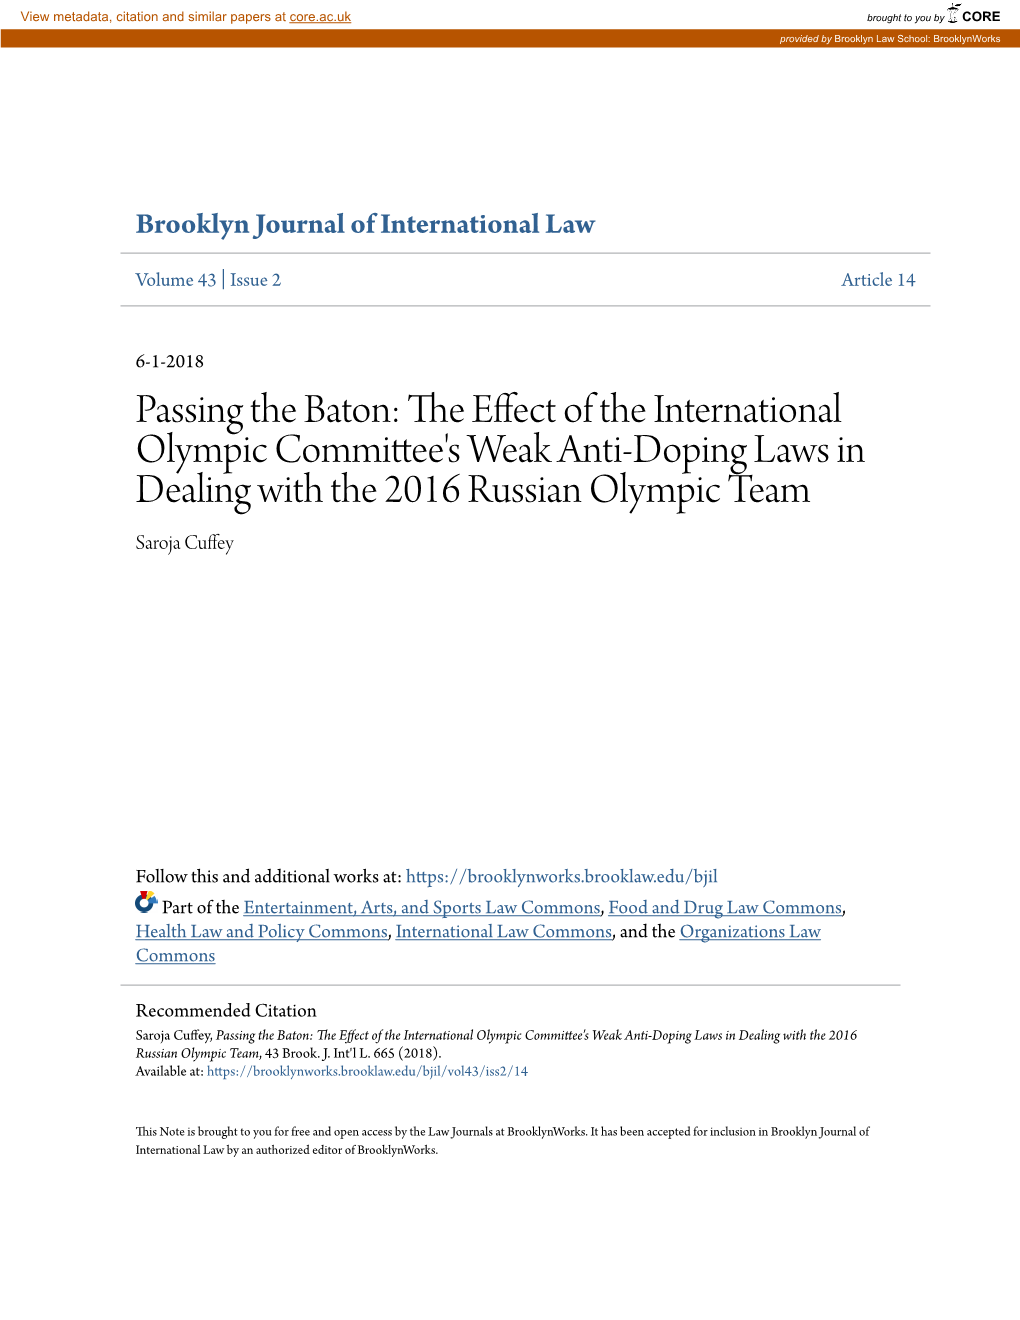 The Effect of the International Olympic Committee's Weak Anti-Doping Laws in Dealing with the 2016 Russian Olympic Team, 43 Brook